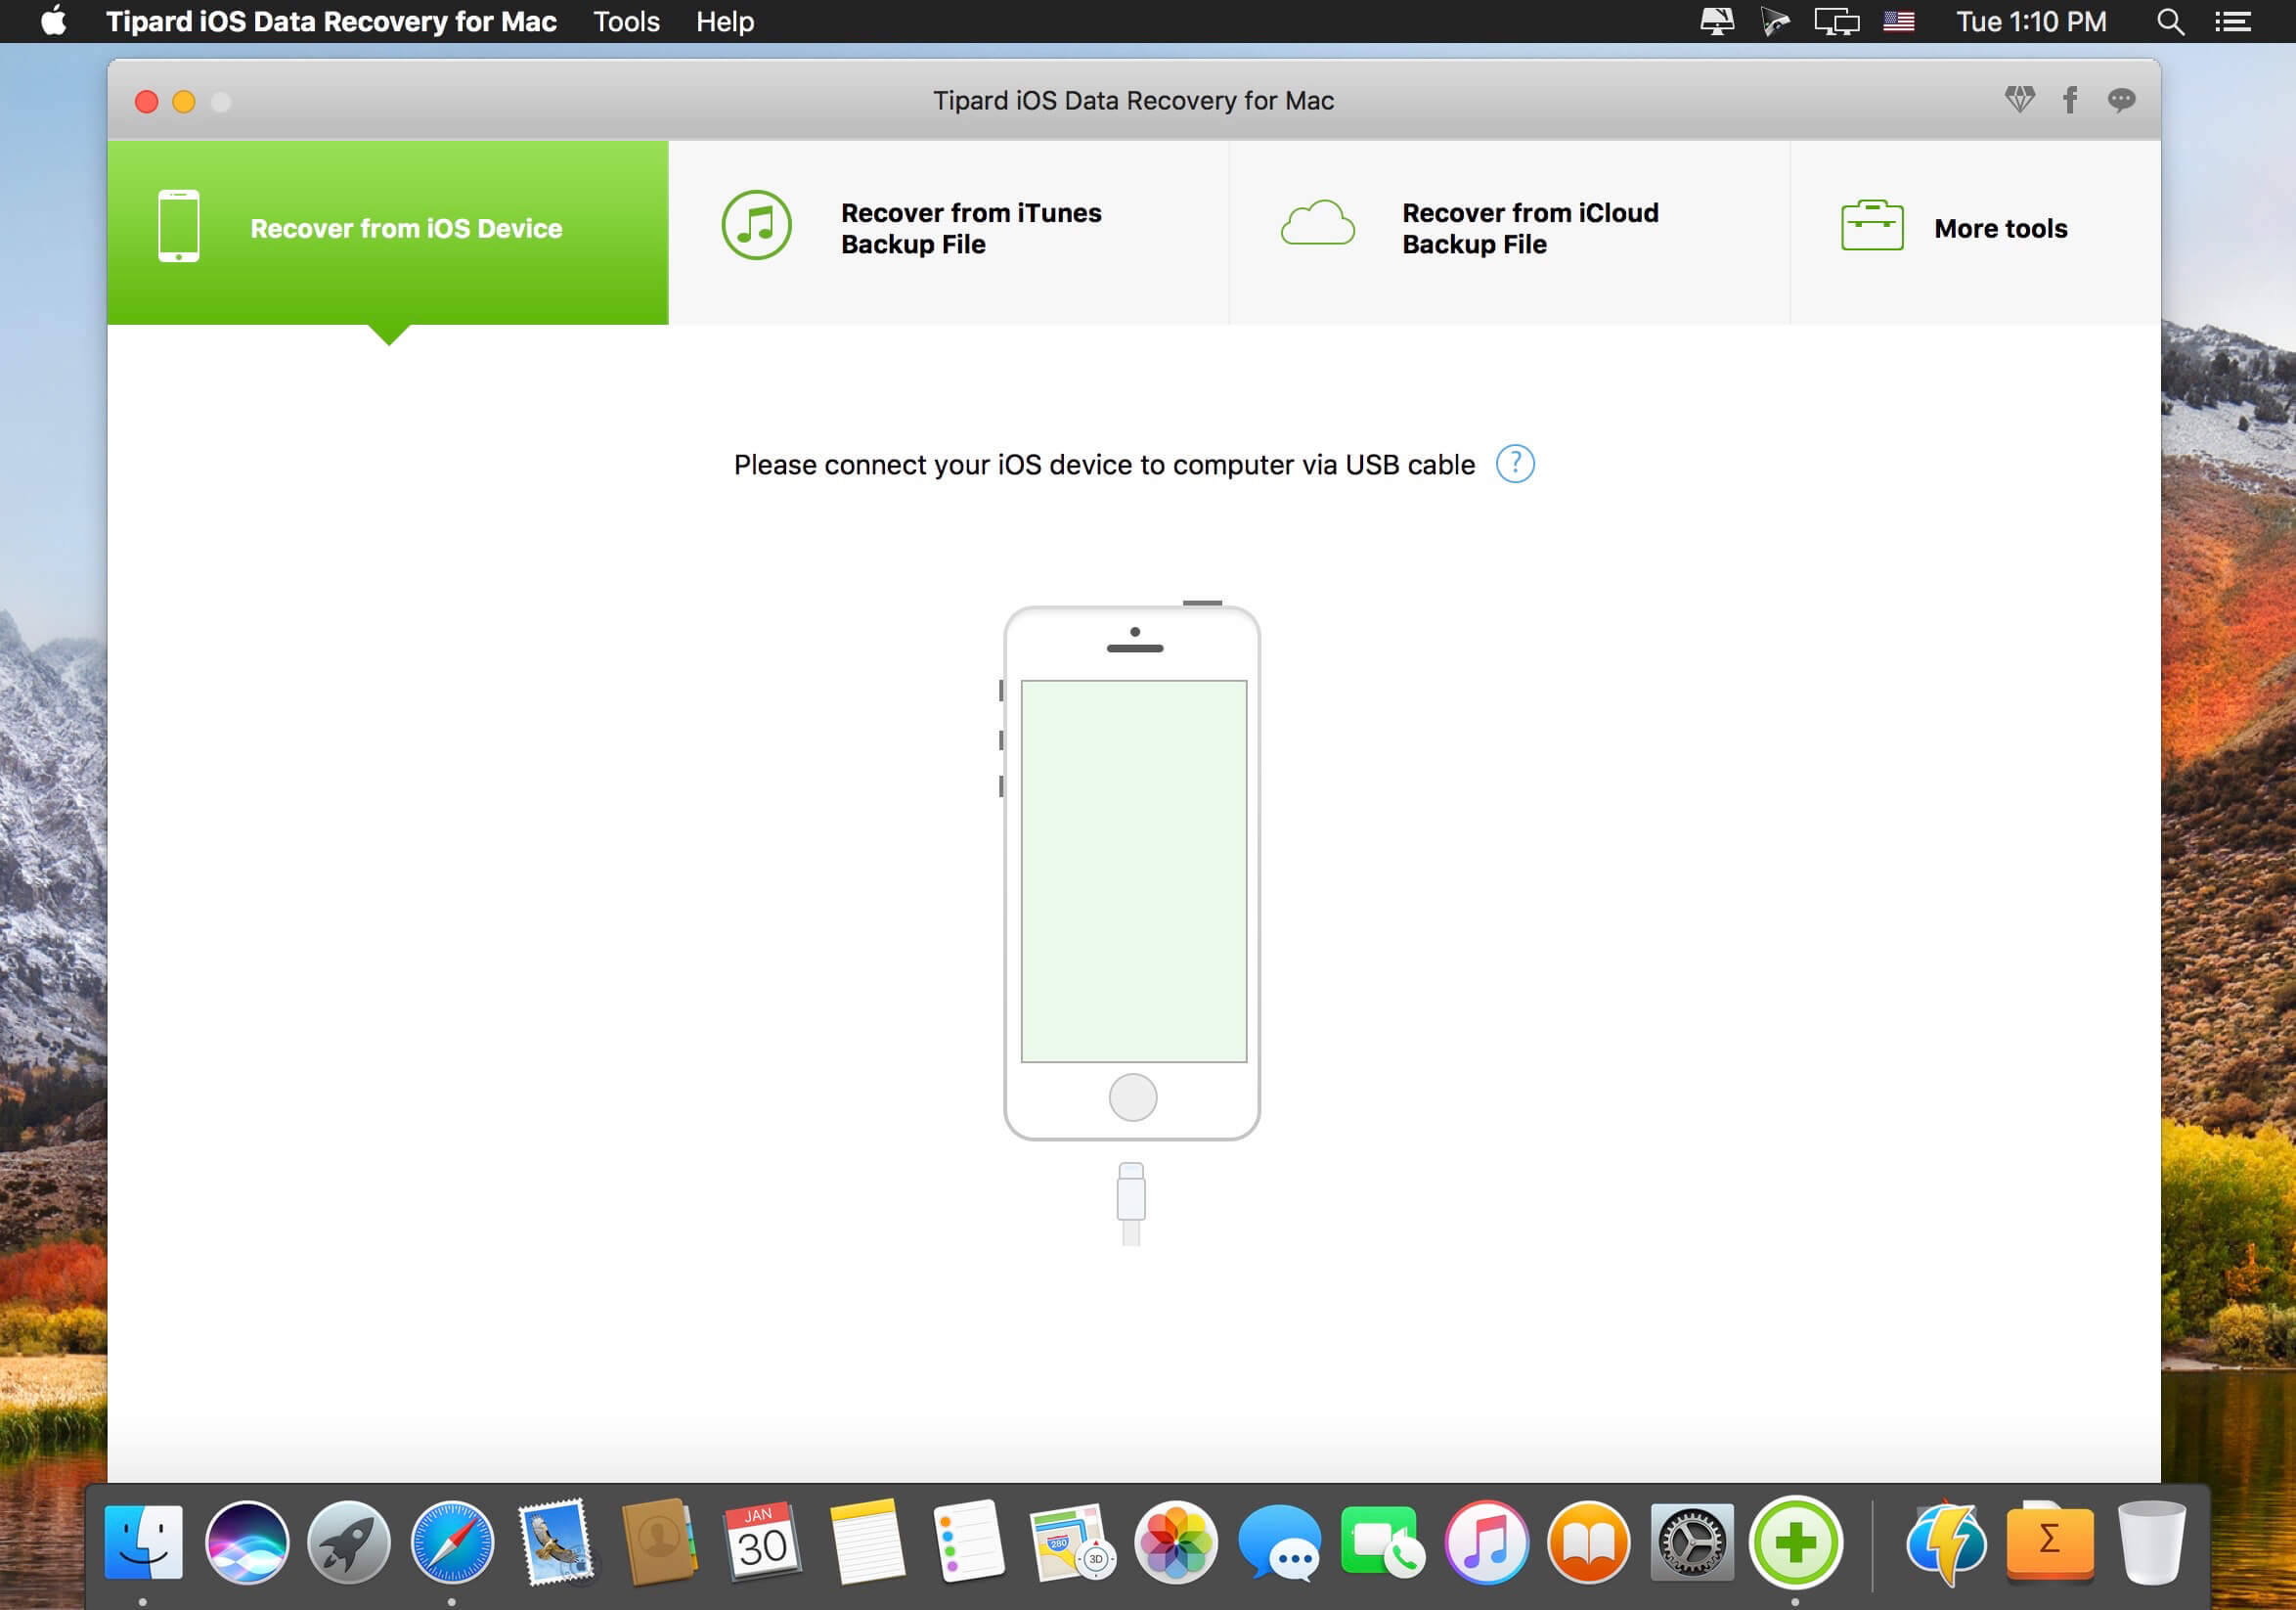 ios data recovery full version